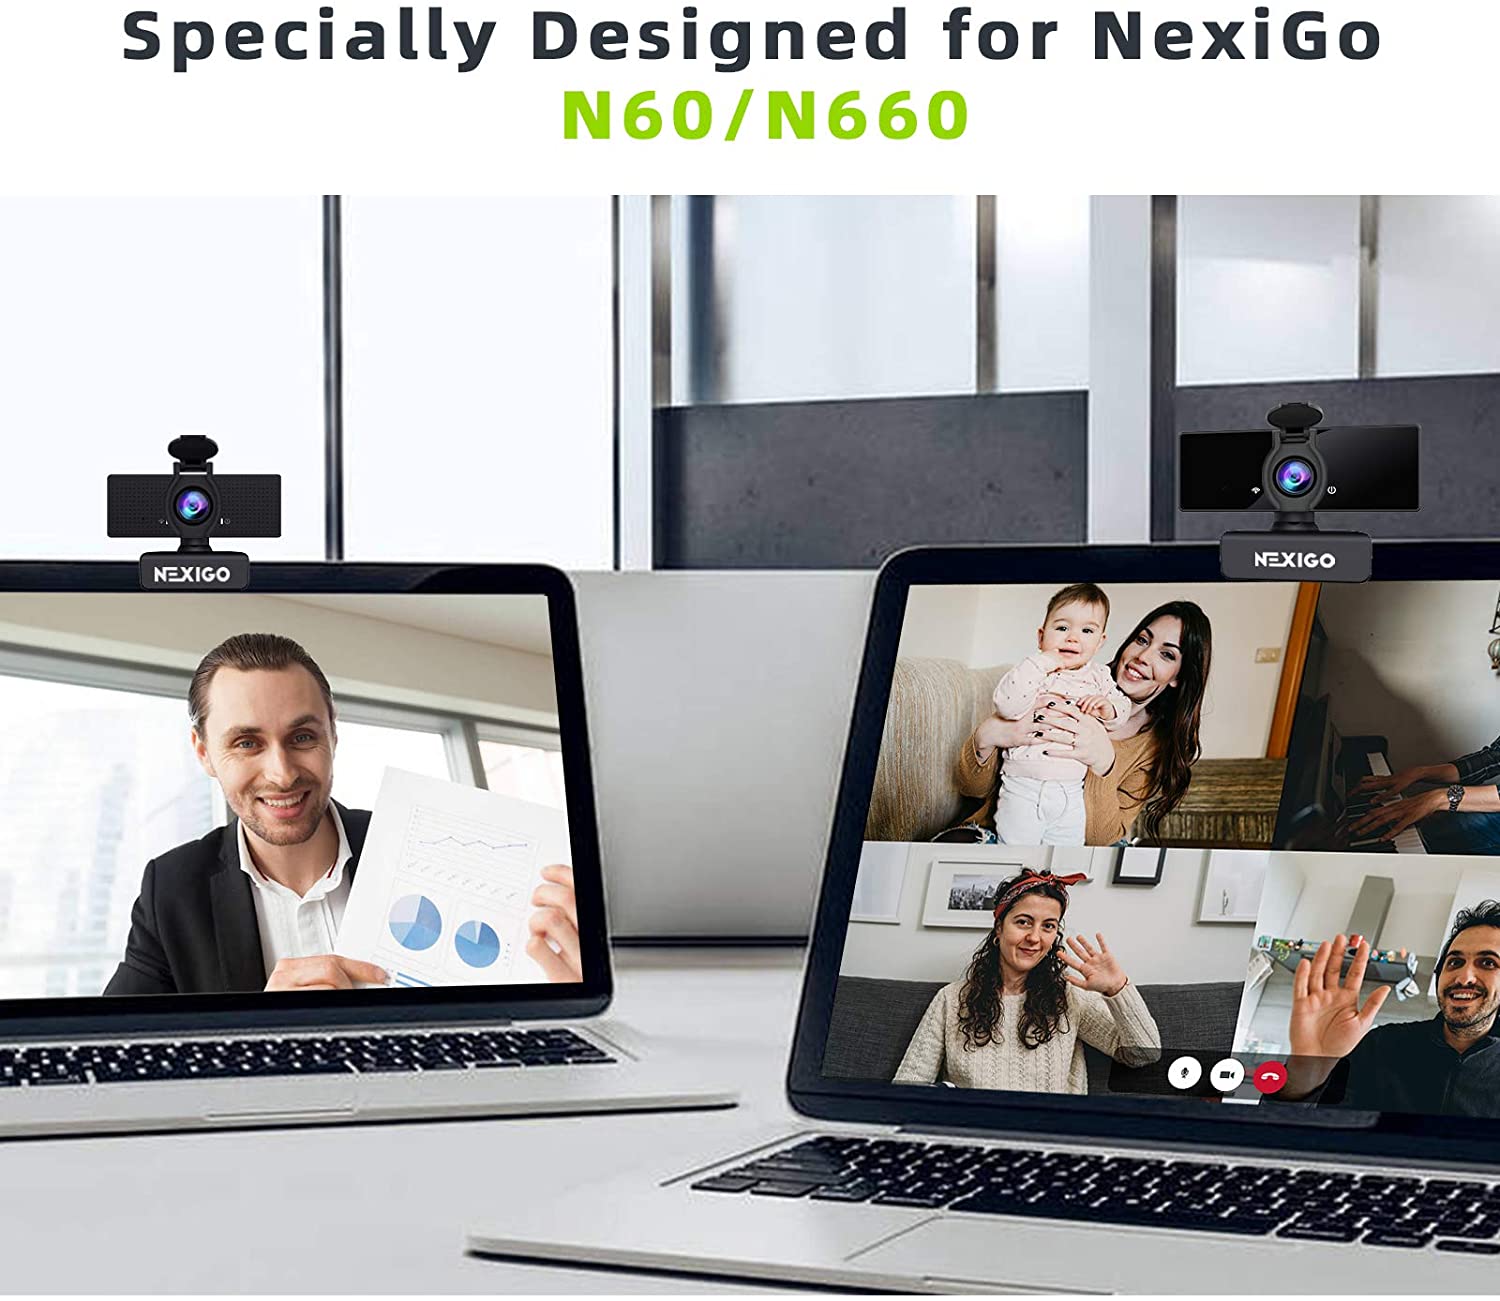 Designed for NexiGo webcam N60/N660, the picture shows what it looks like installed on it.